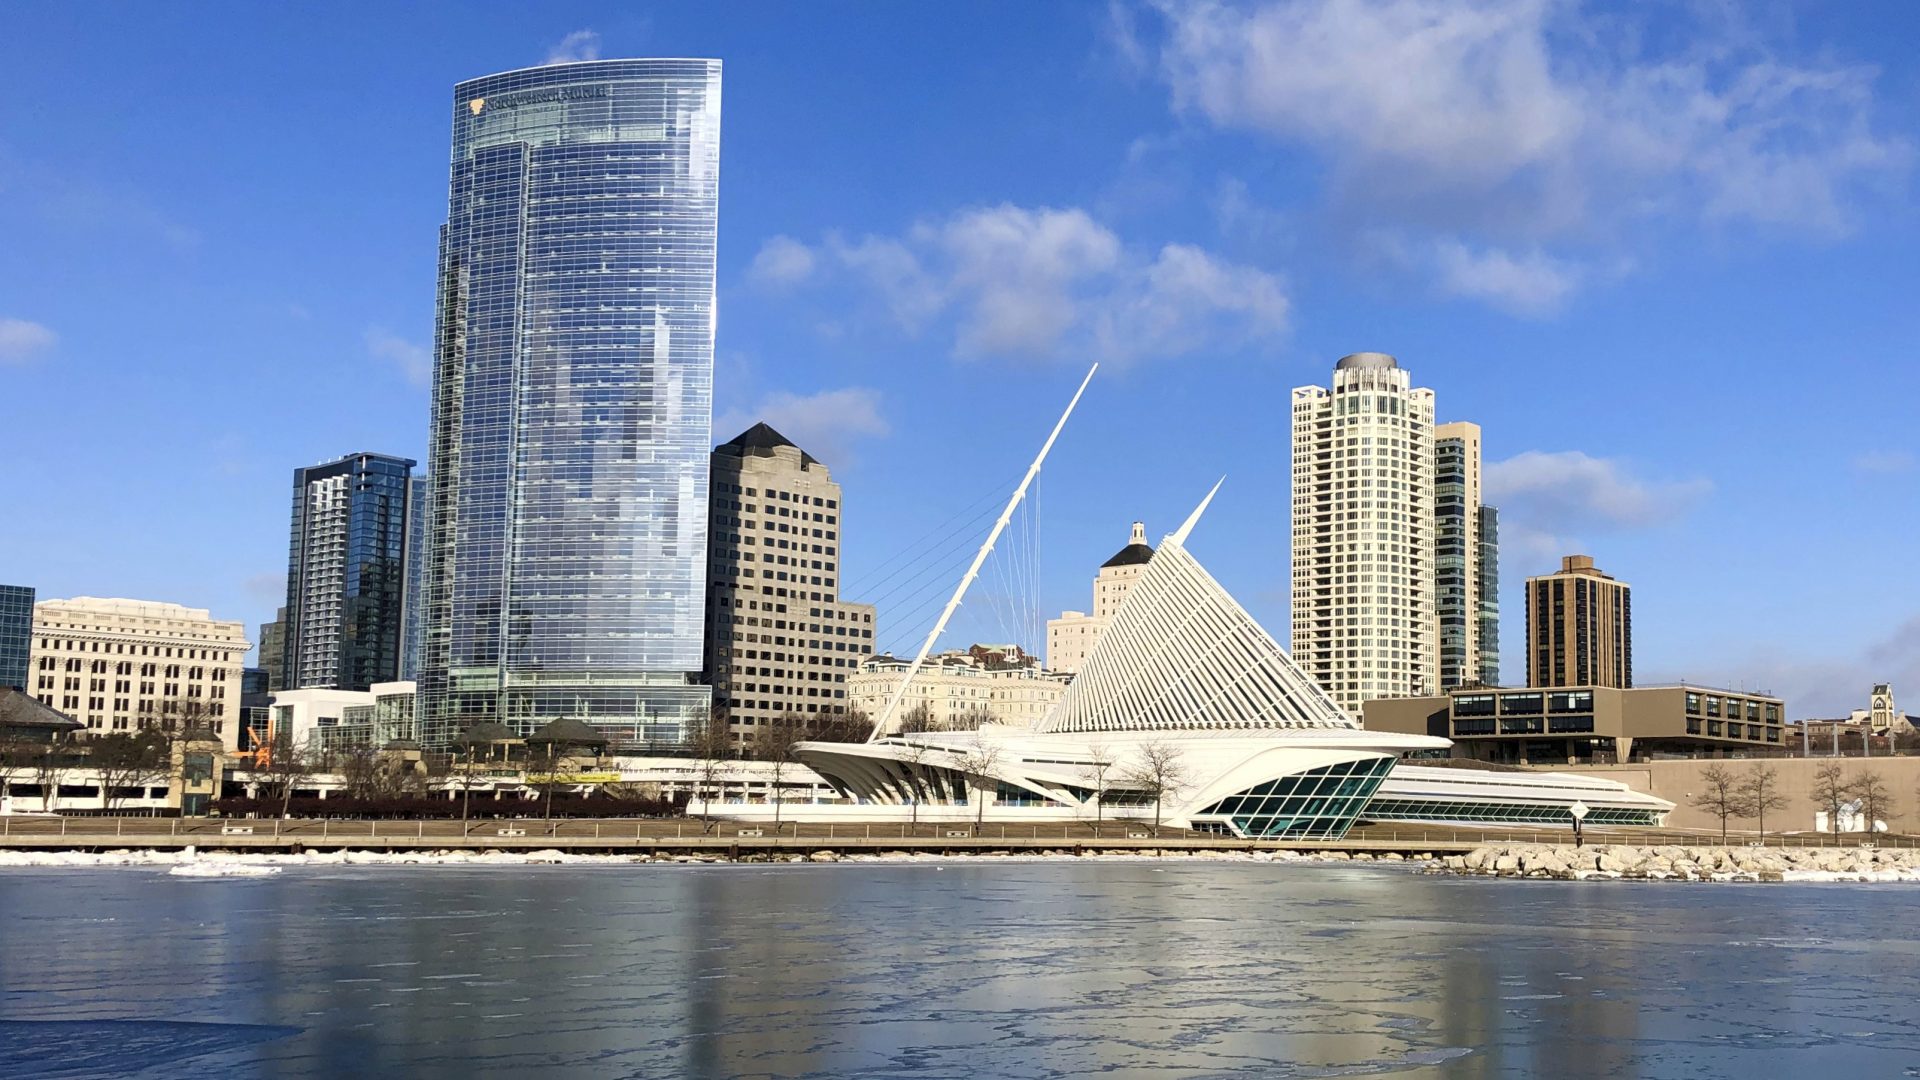 Democrats selected Milwaukee to host their 2020 national convention.